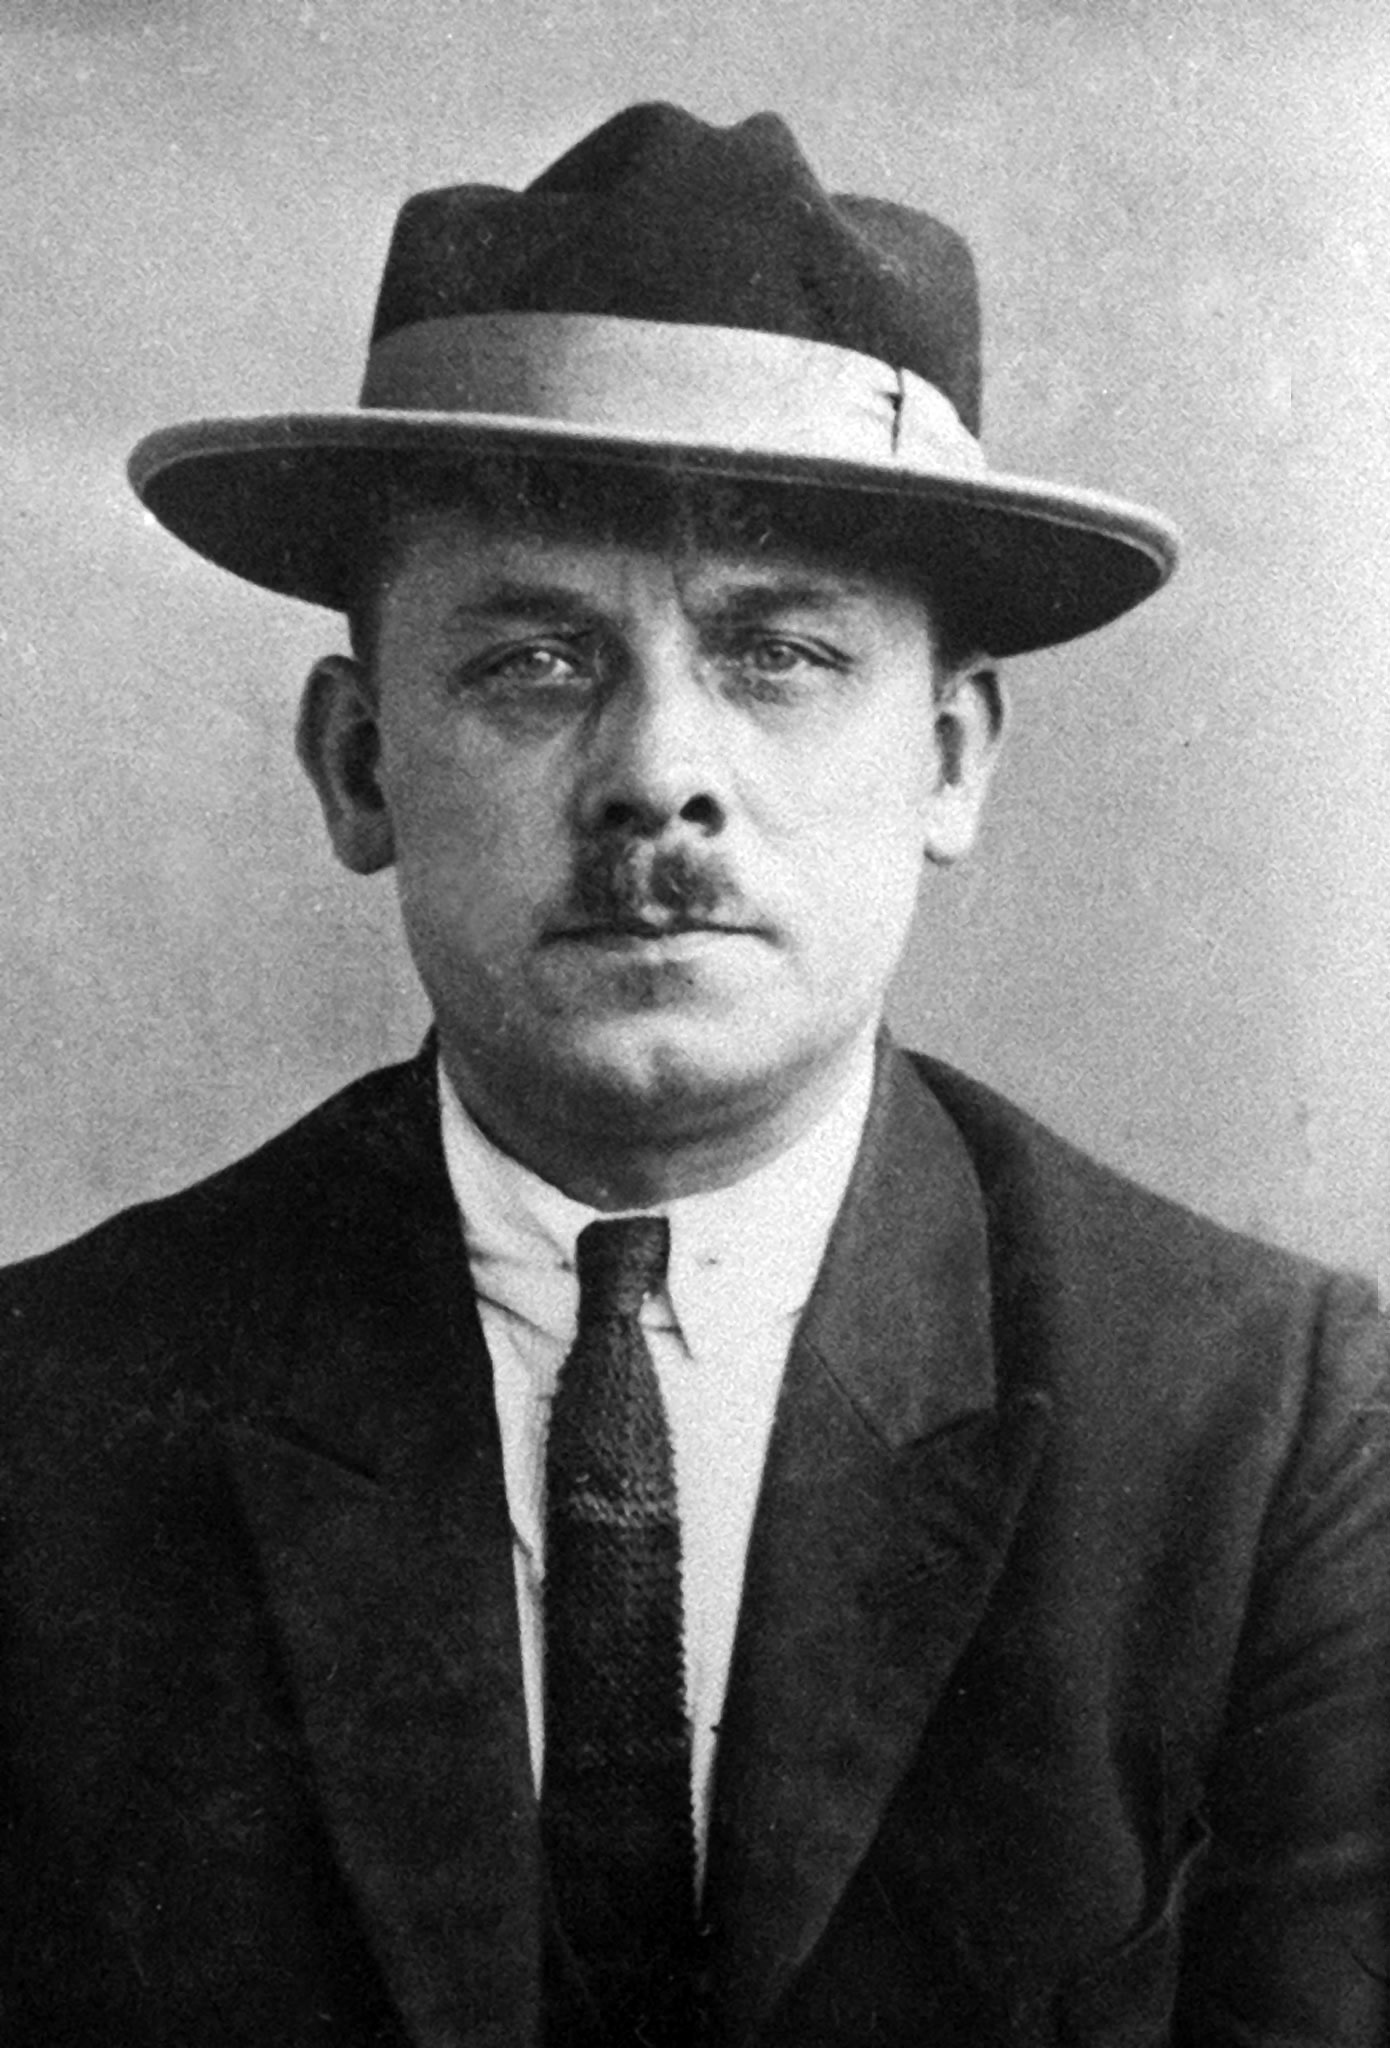 This is Fritz Haarman aka “The vampire of Hanover” who killed 24 boys between 1918 and 1924. He lured his victims home, raped then killed them by biting through their necks. He was popular among his neighbours because he sold used clothes and all kinds of meat for half of the usual price